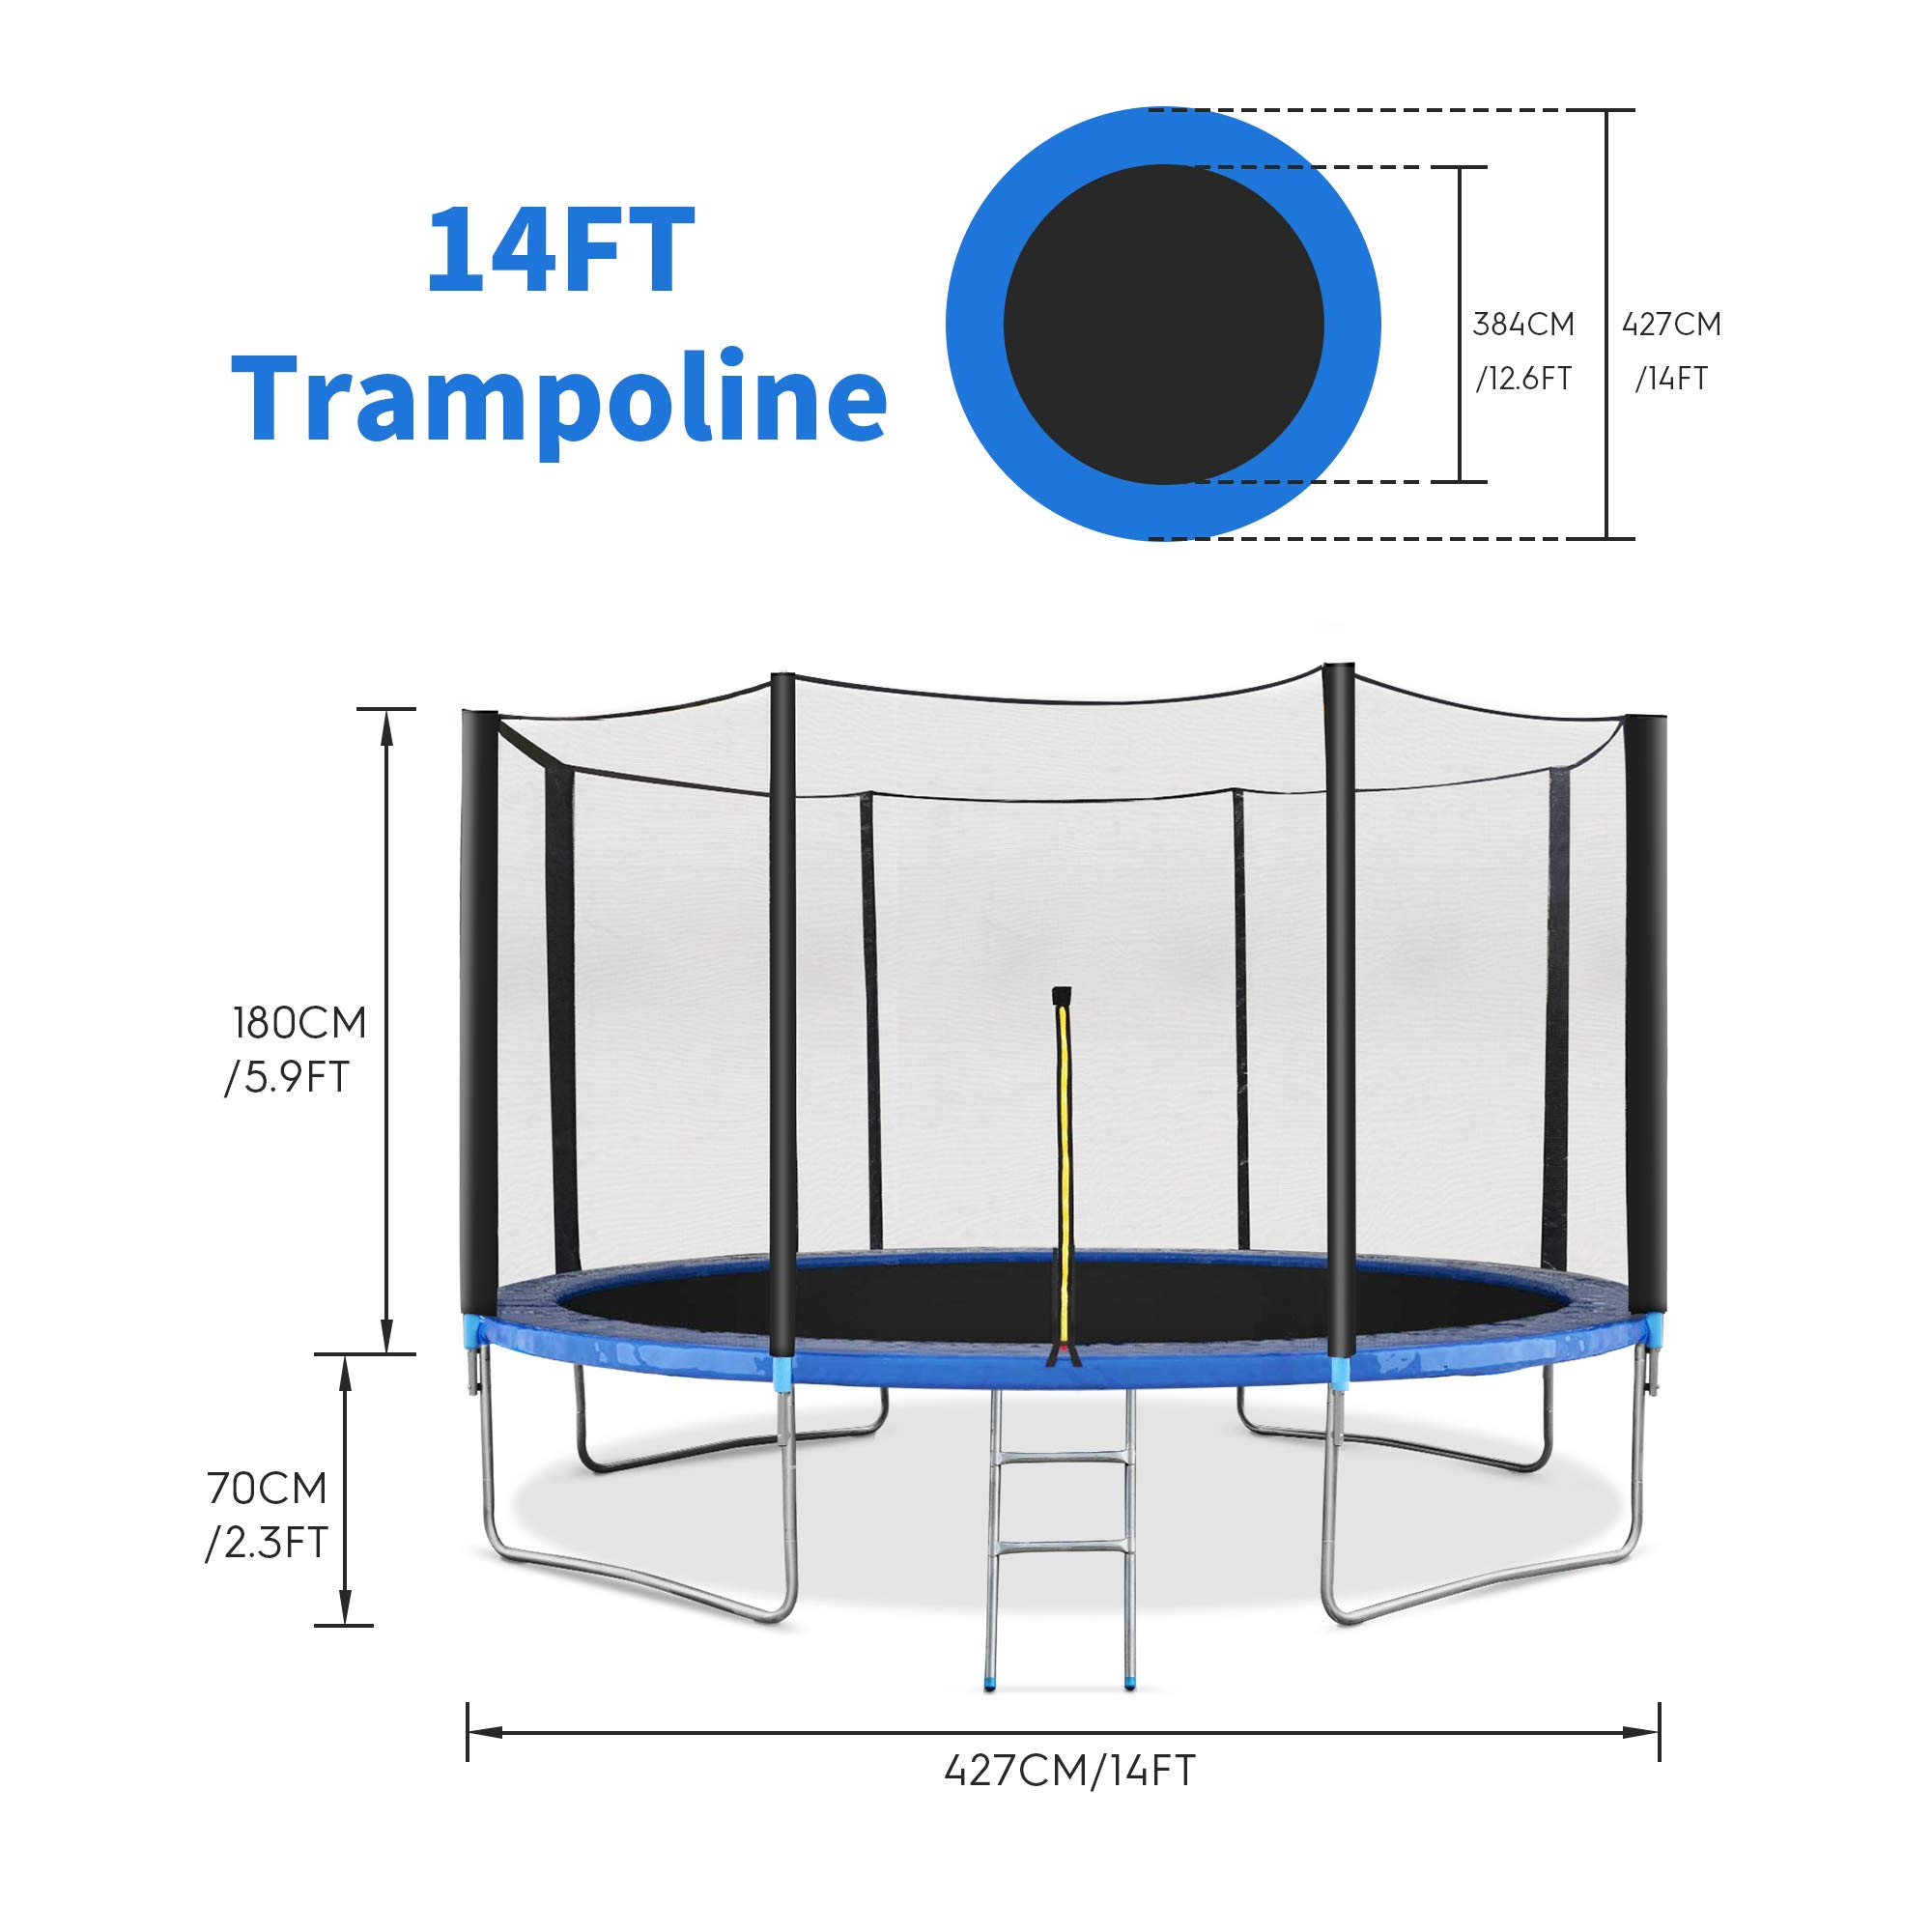 Maxkare 14FT Trampoline with Safety Enclosure, Low Intensity Weight Capacity 450lbs, for Kids Adults Outdoor